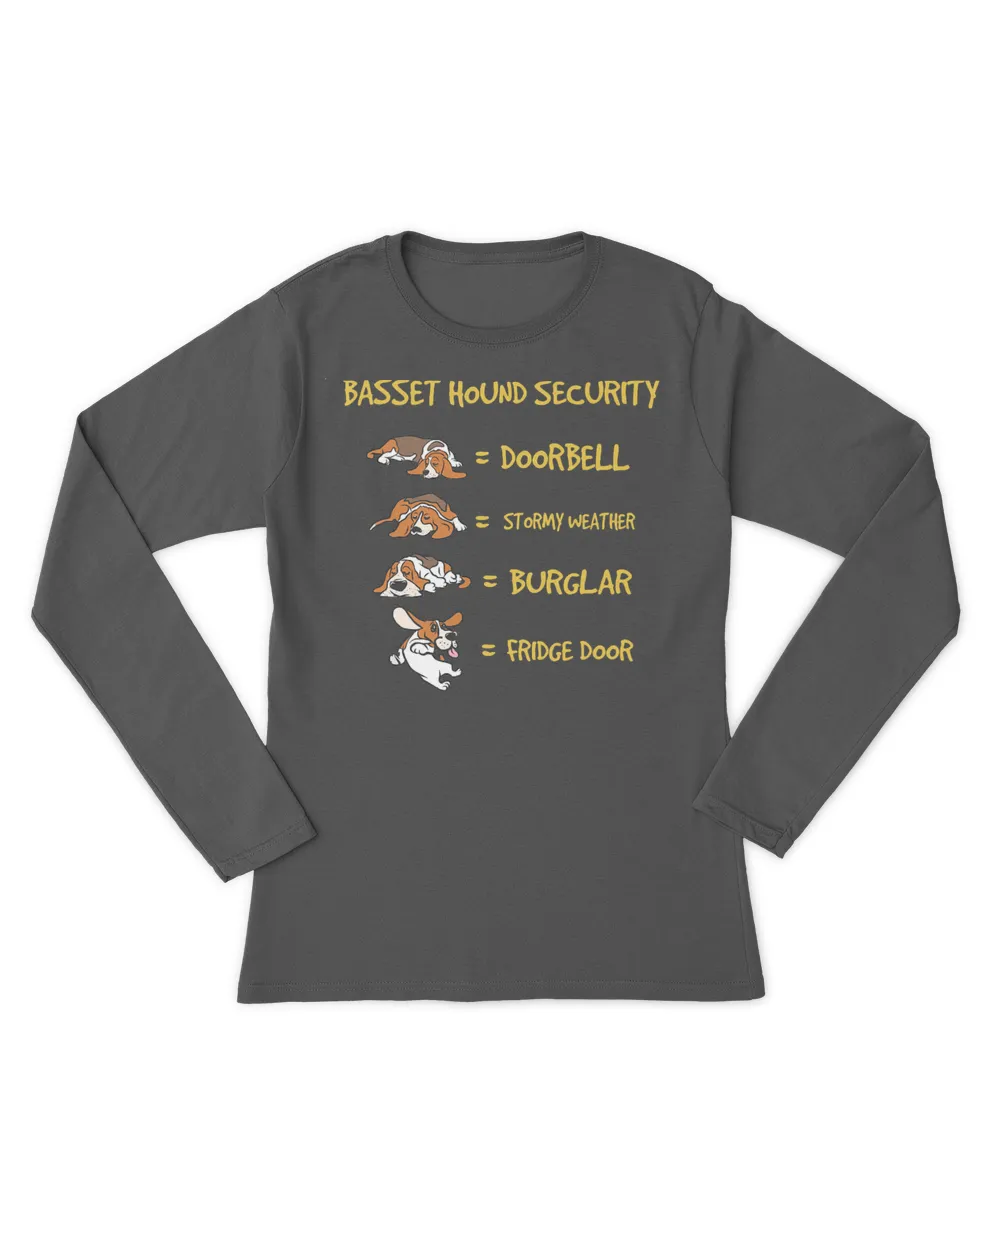 Basset Hound Security Gifts Funny Costume For Men Clothing T-Shirt